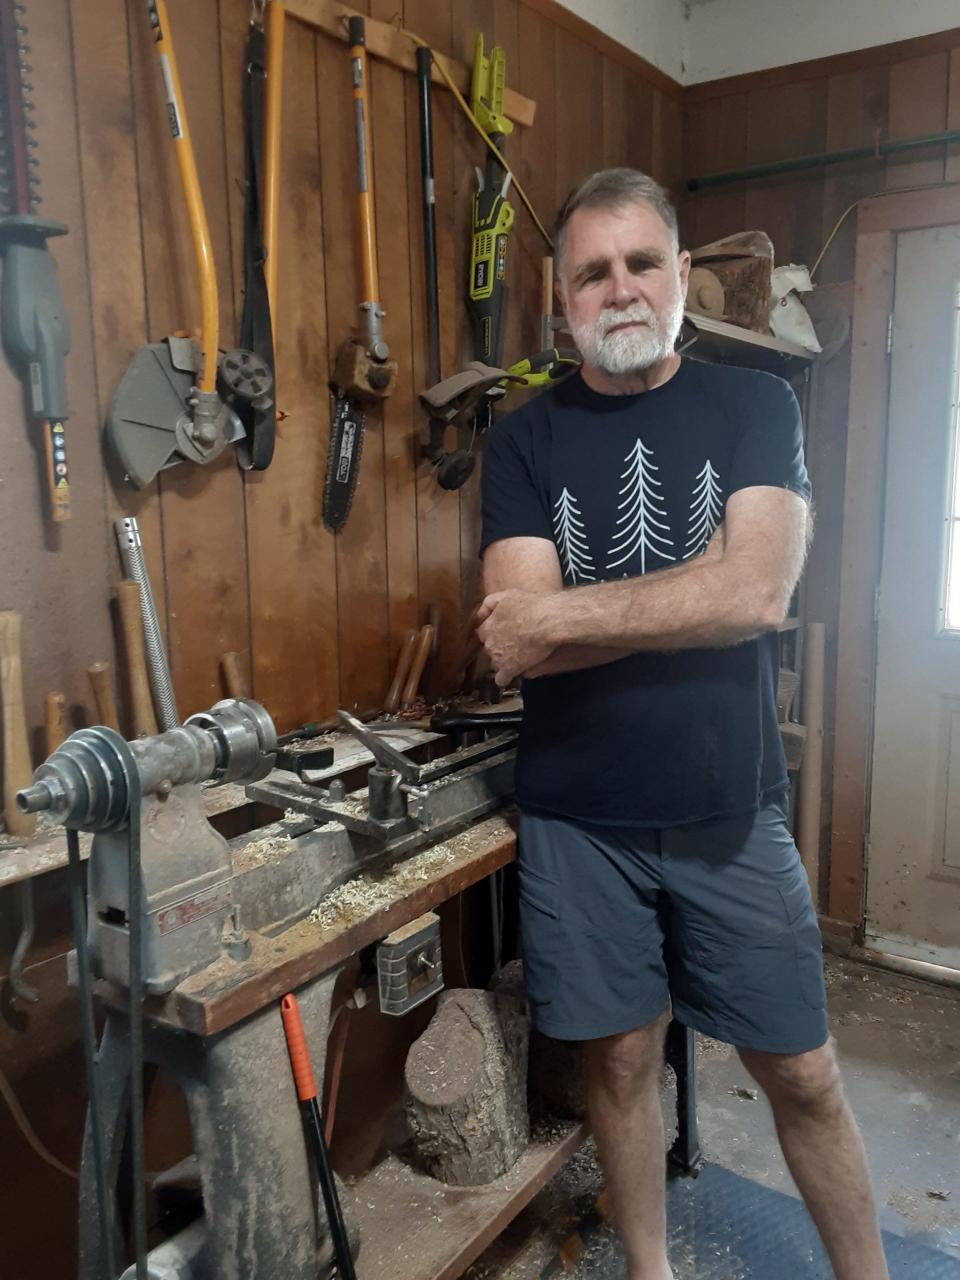 Stephen Holmes in his home workshop with his main wood carving tool, a wood lathe.